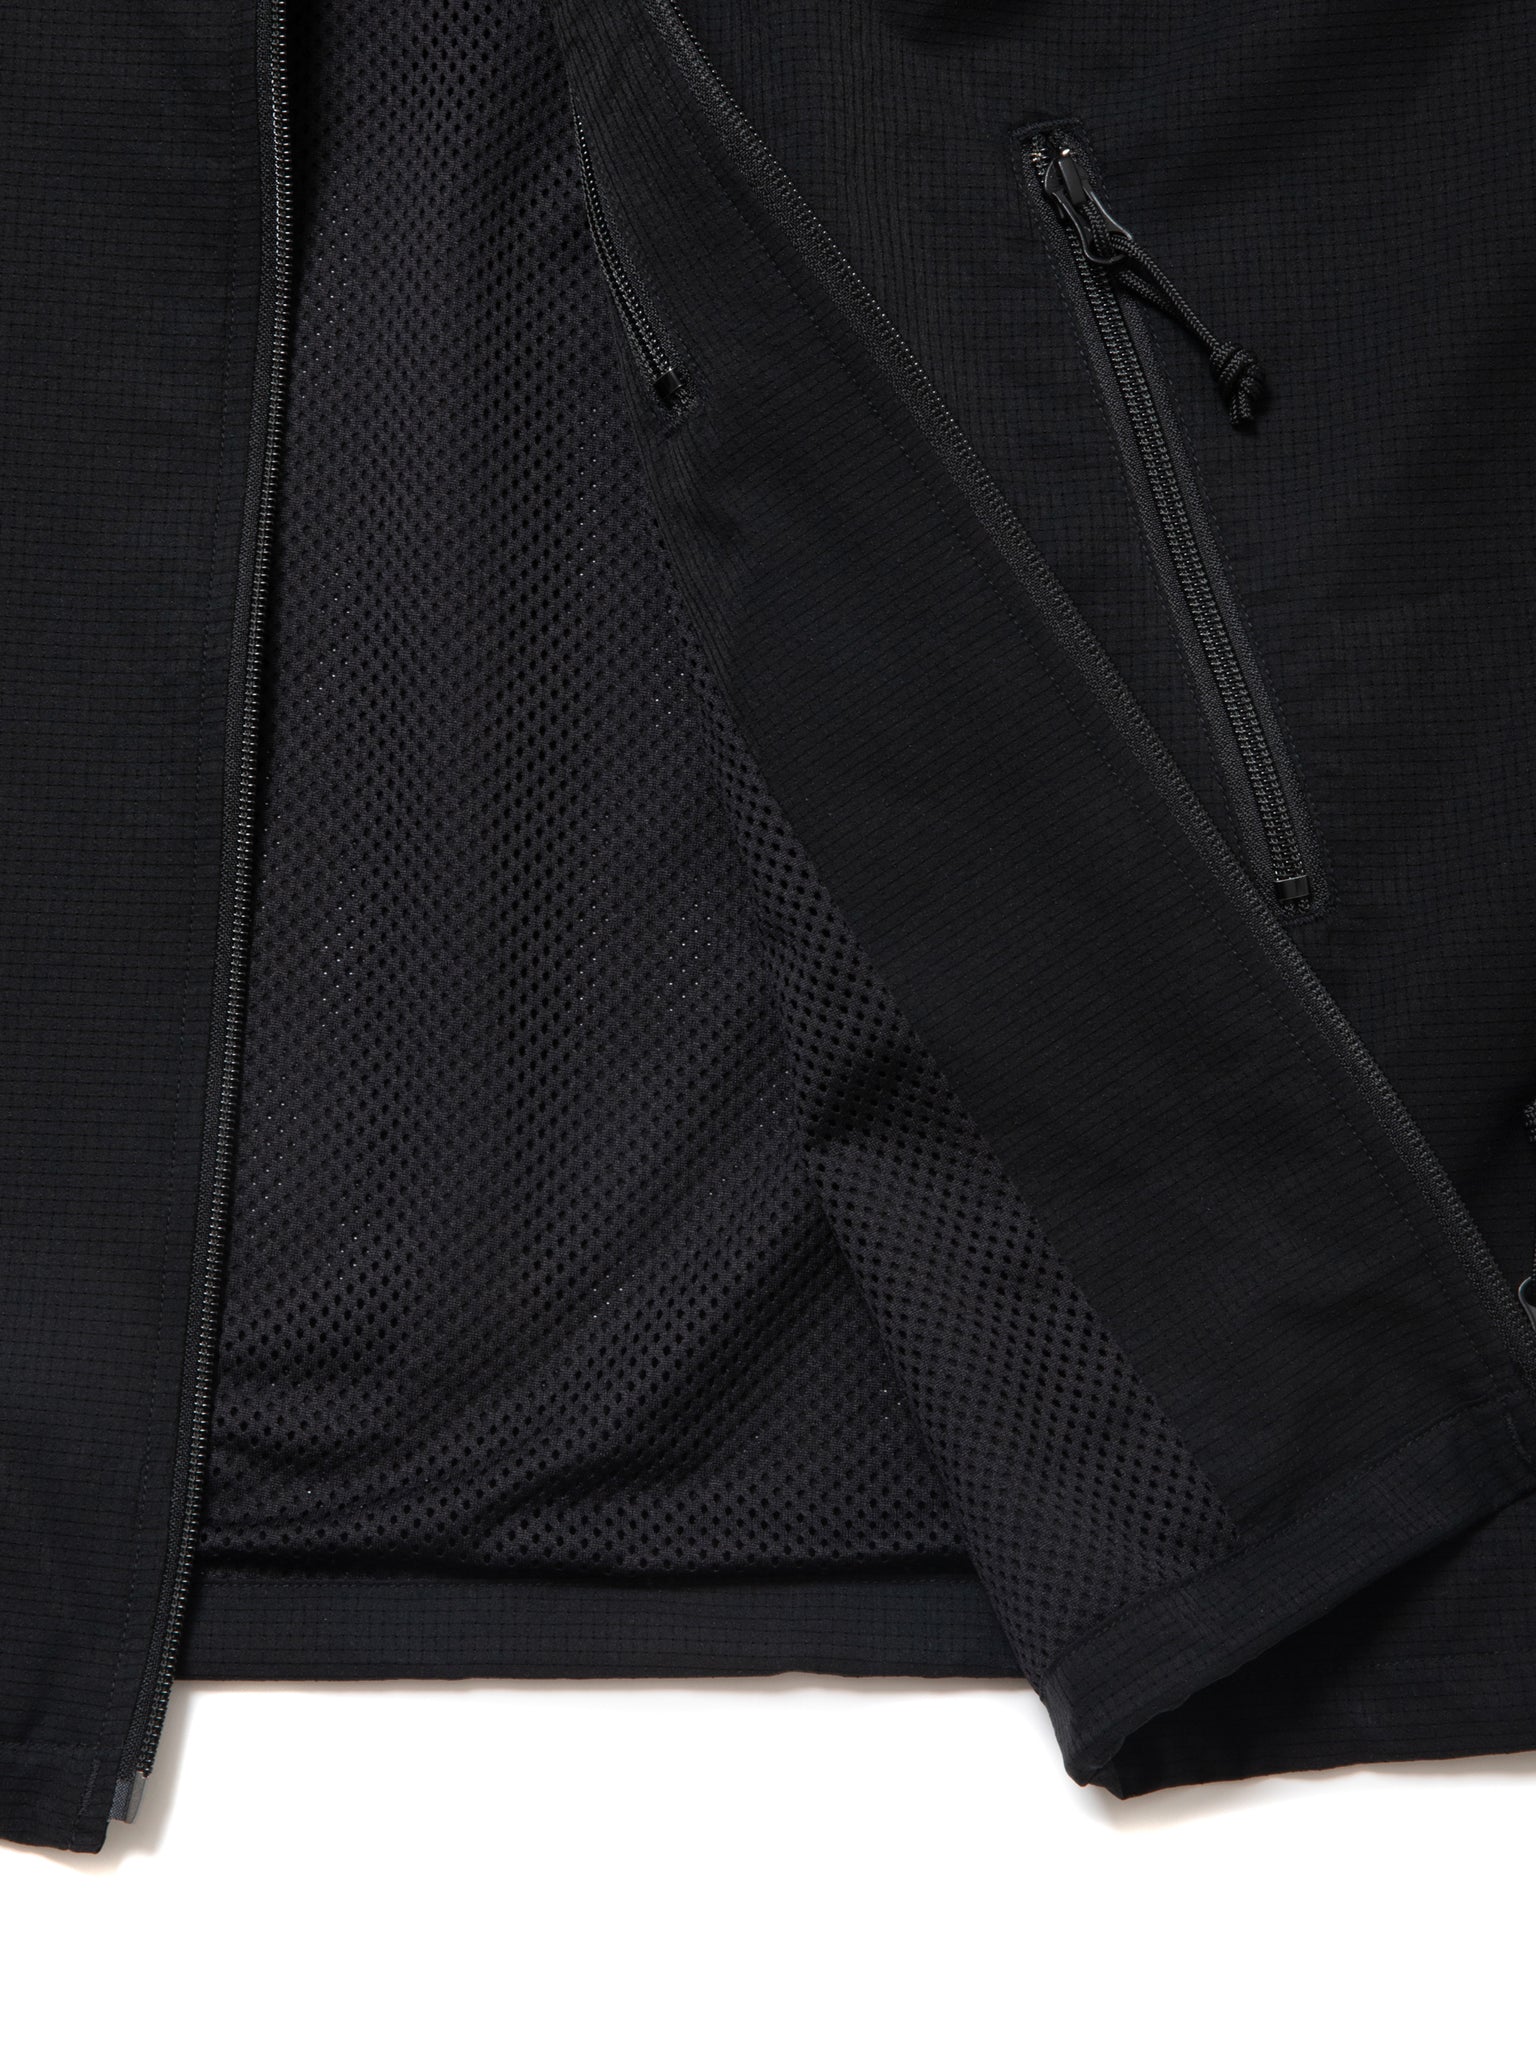 Polyester Perforated Cloth Track Jacket